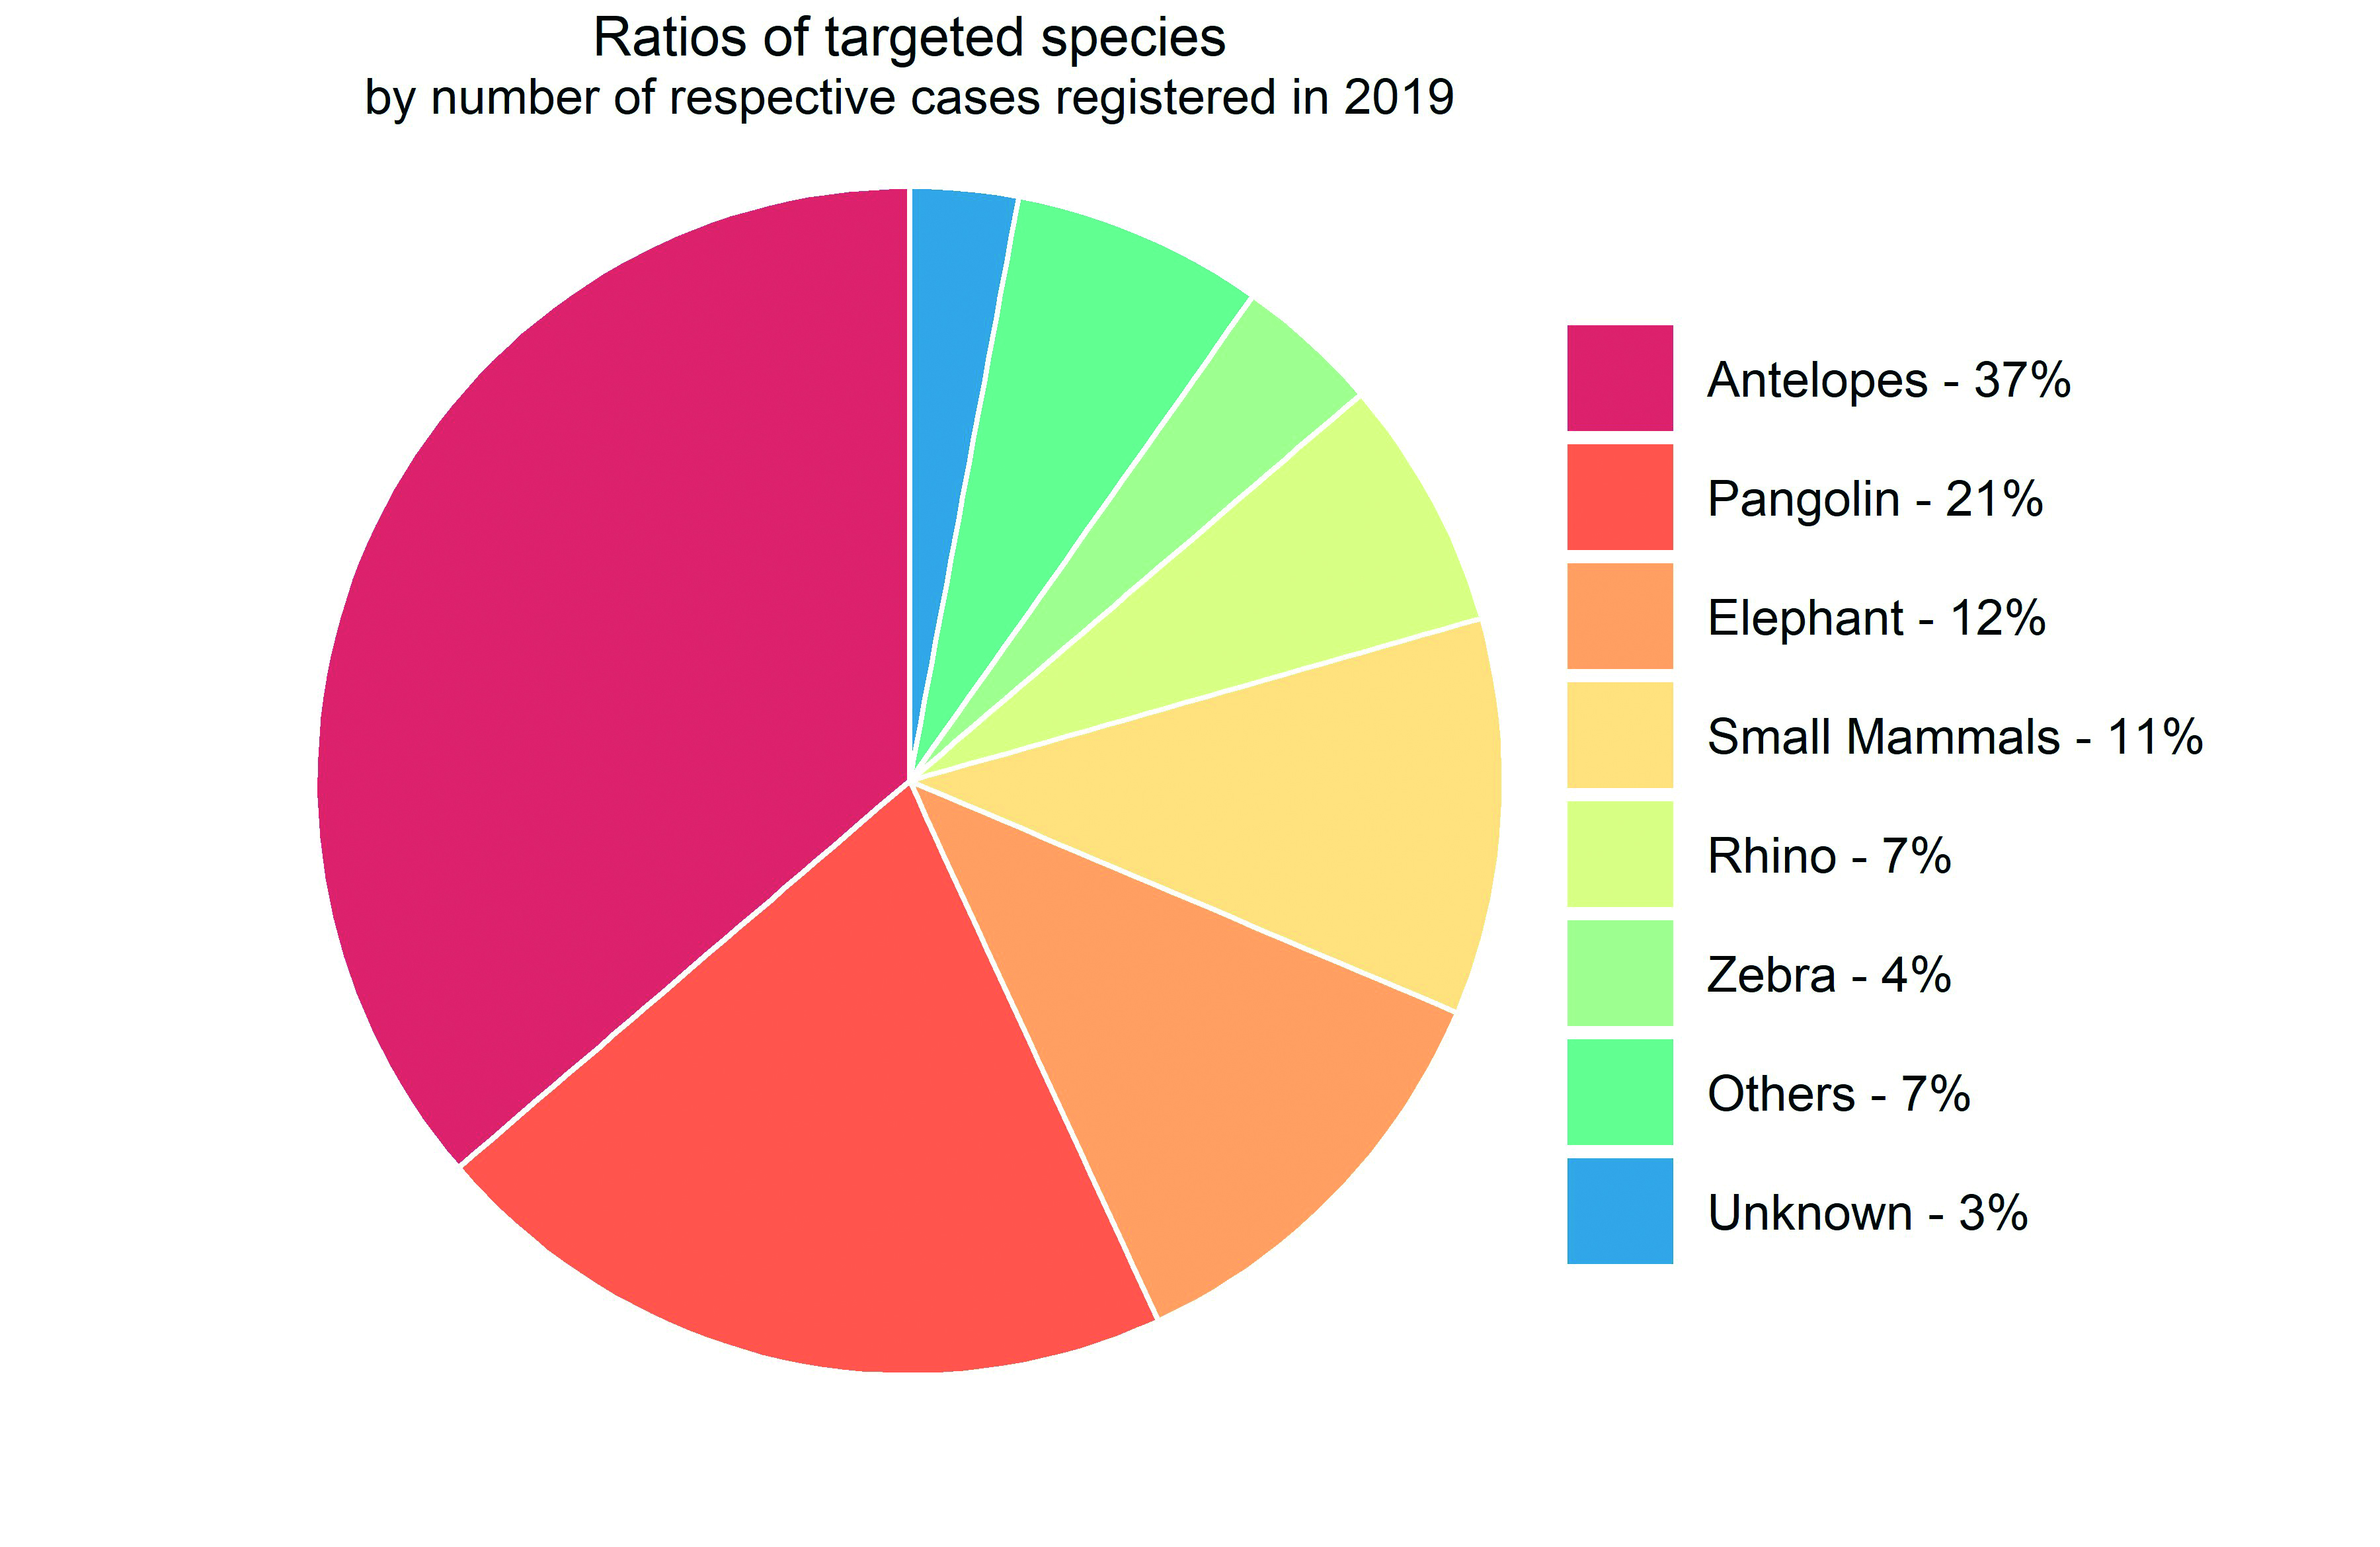 A pie chart showing which animals are most often poached. 37% are antelope, 21% pangolin, 12% elephant, 7% rhino.